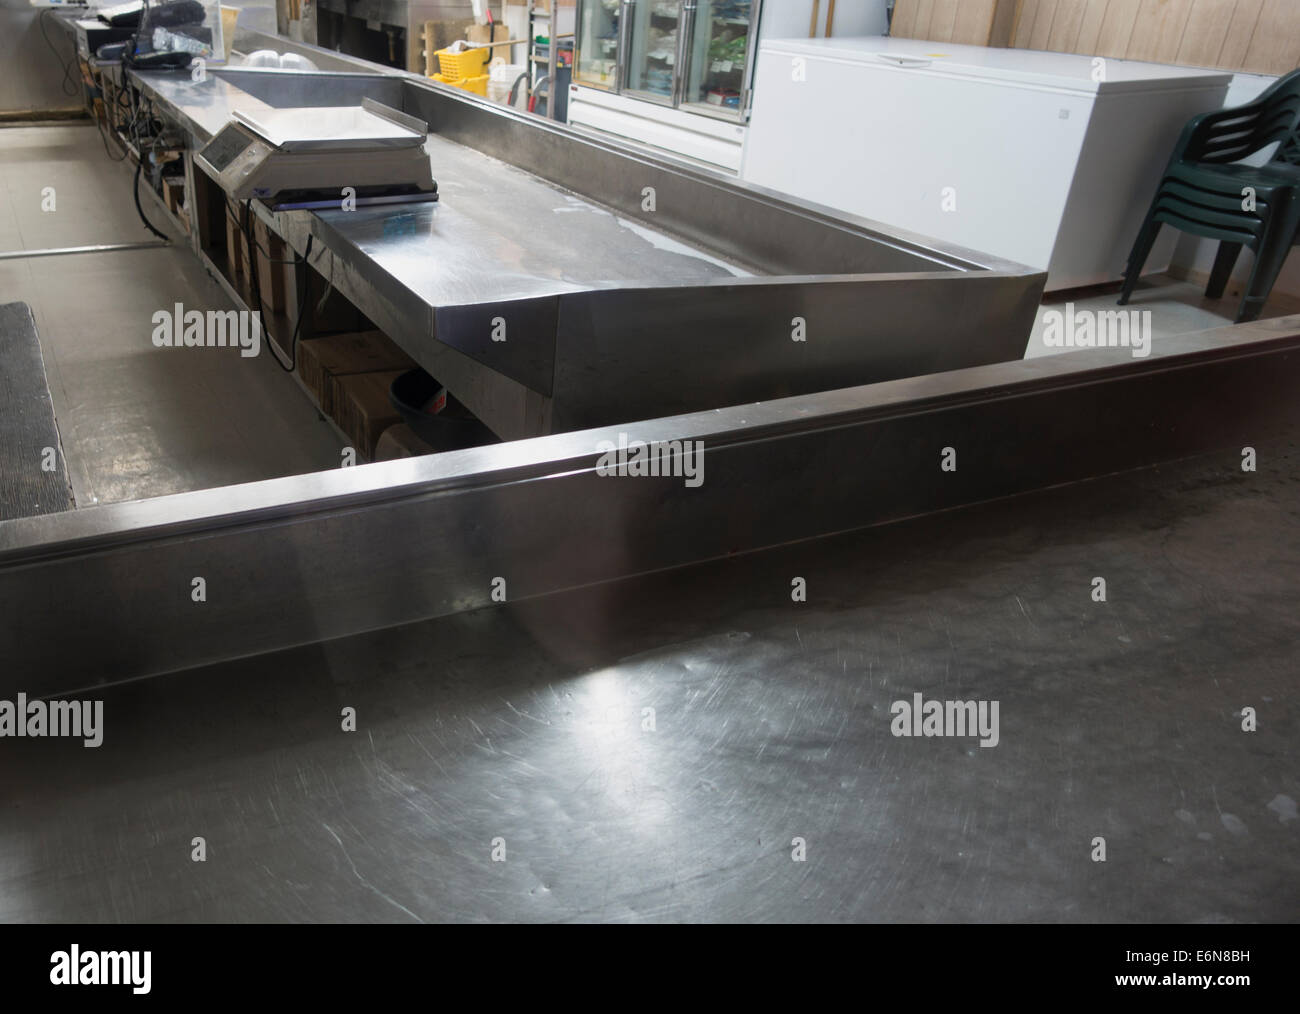 empty bins in fish store with no customers Stock Photo